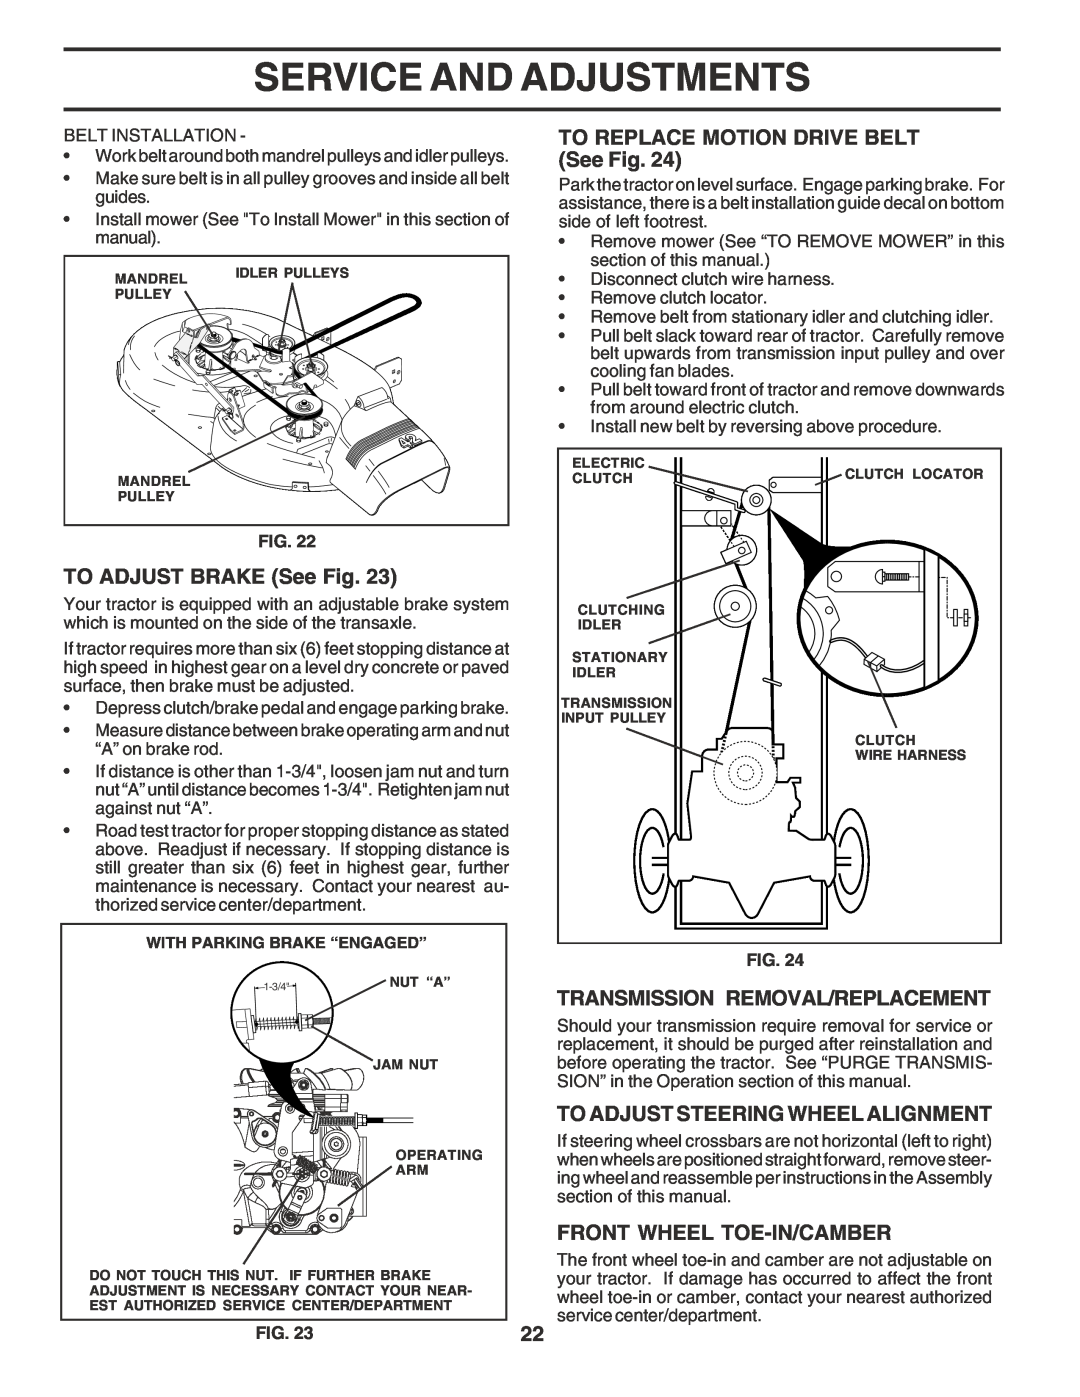 Poulan PR20PH42STA TO ADJUST BRAKE See Fig, TO REPLACE MOTION DRIVE BELT See Fig, Transmission Removal/Replacement 